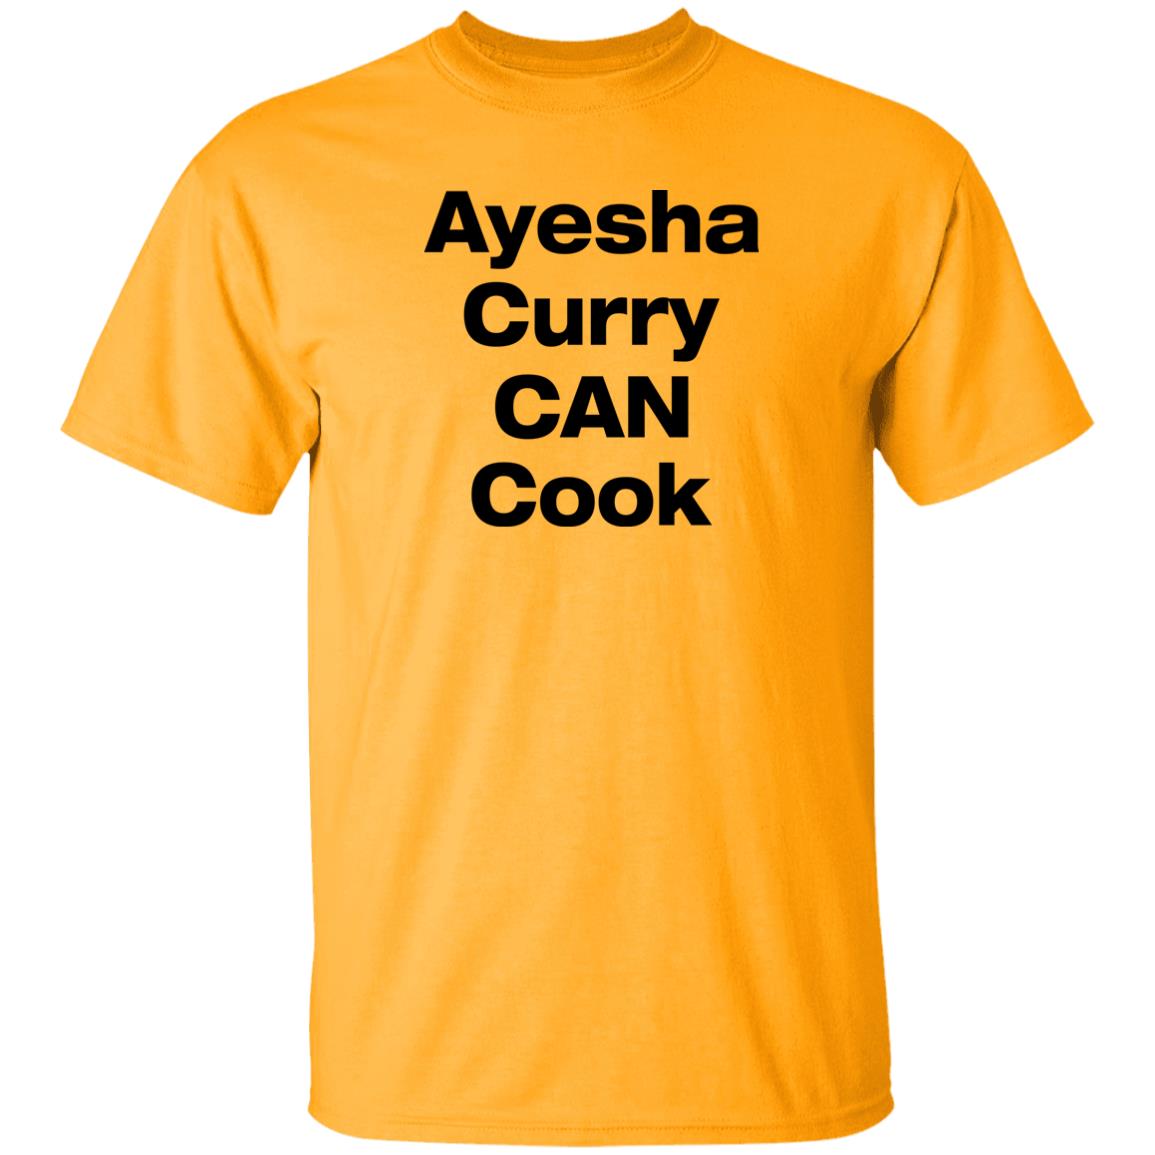 Steph Curry Ayesha Curry Can Cook Shirt